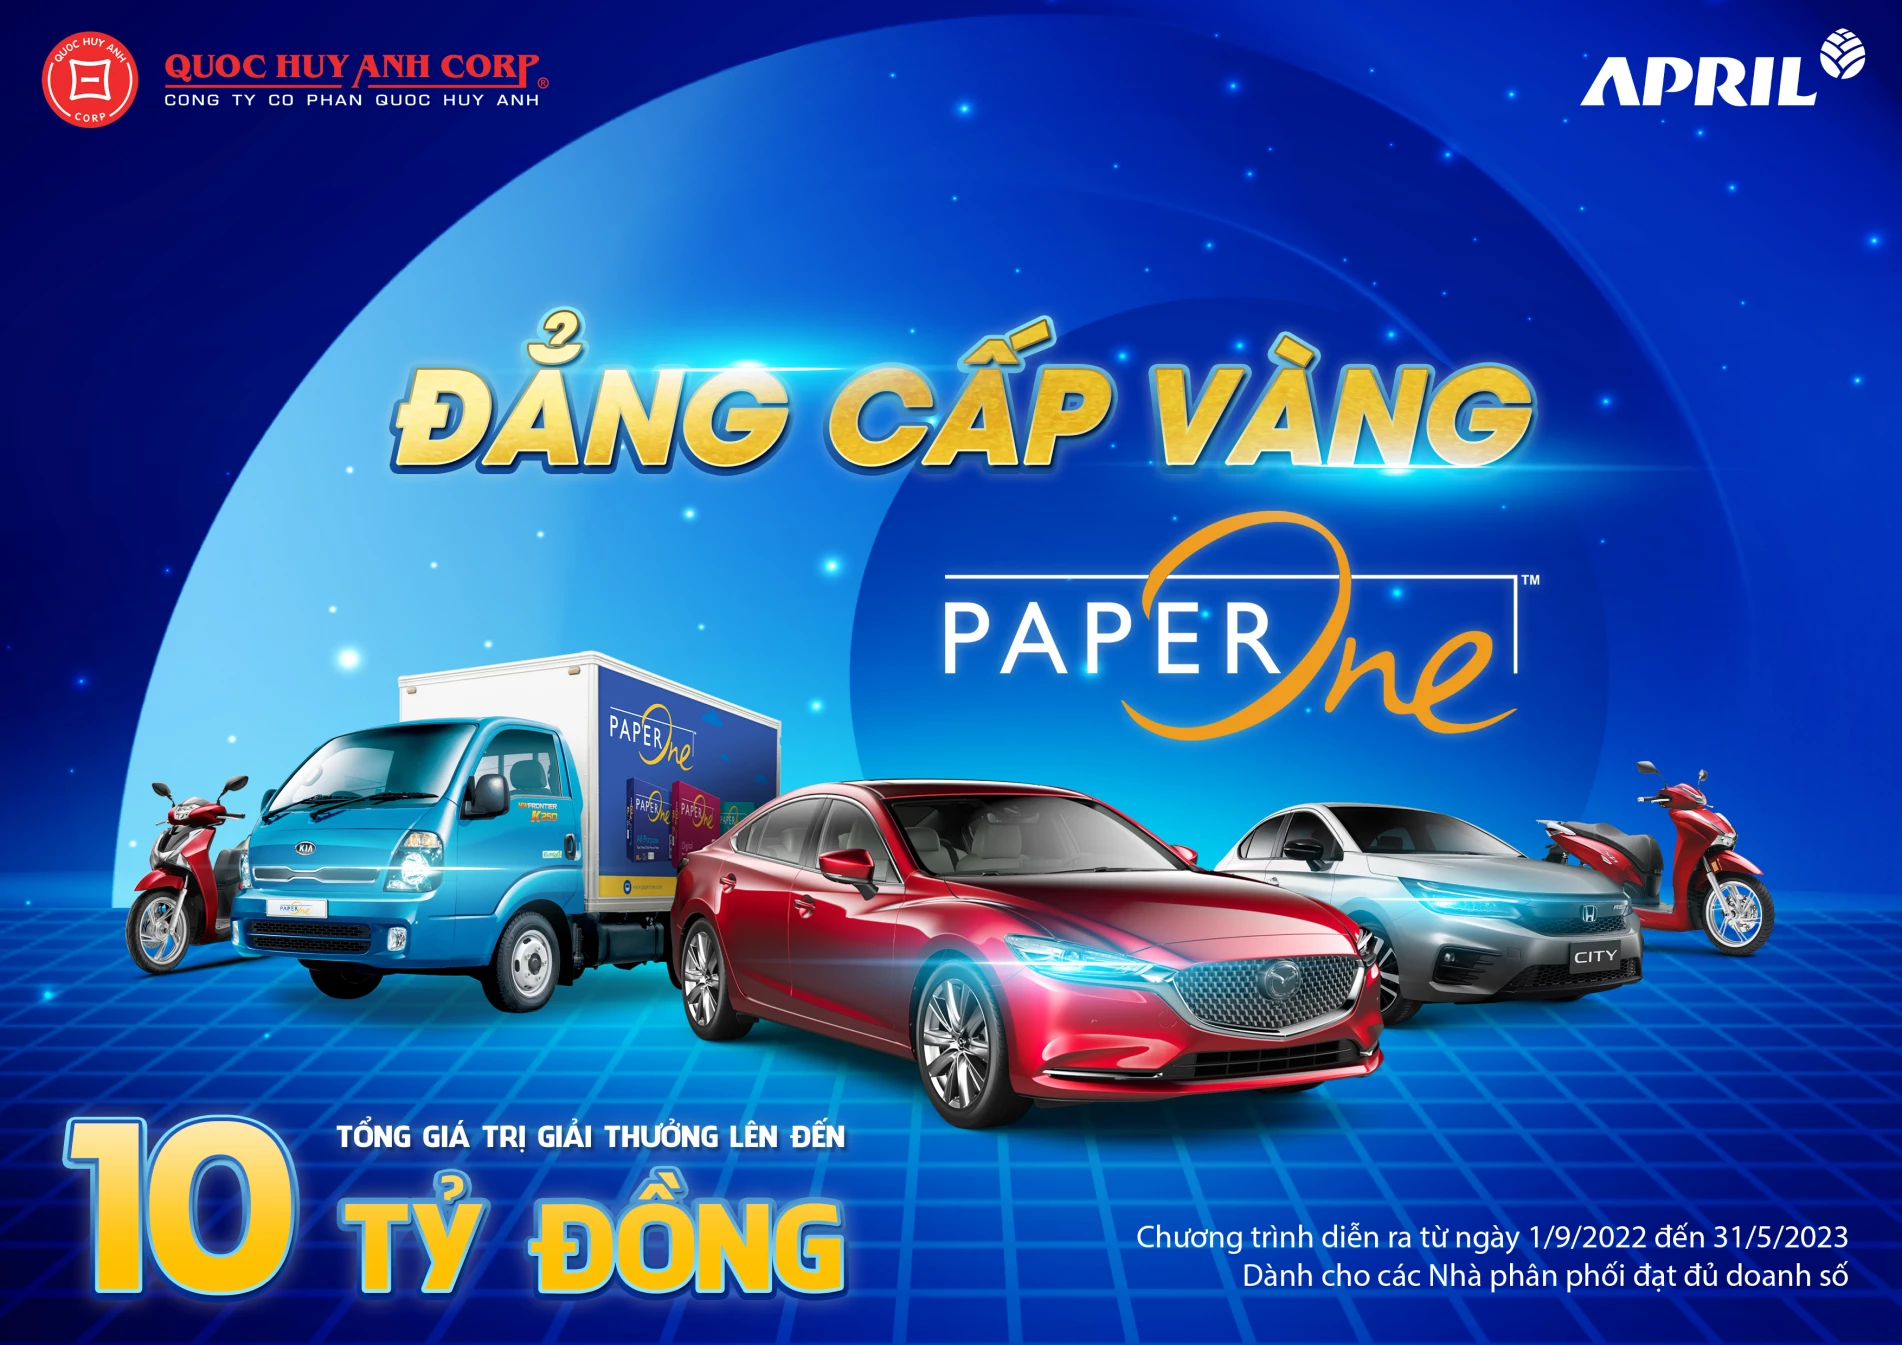 Quoc Huy Anh: Gratitude to &quot;PaperOne Gold Class&quot;